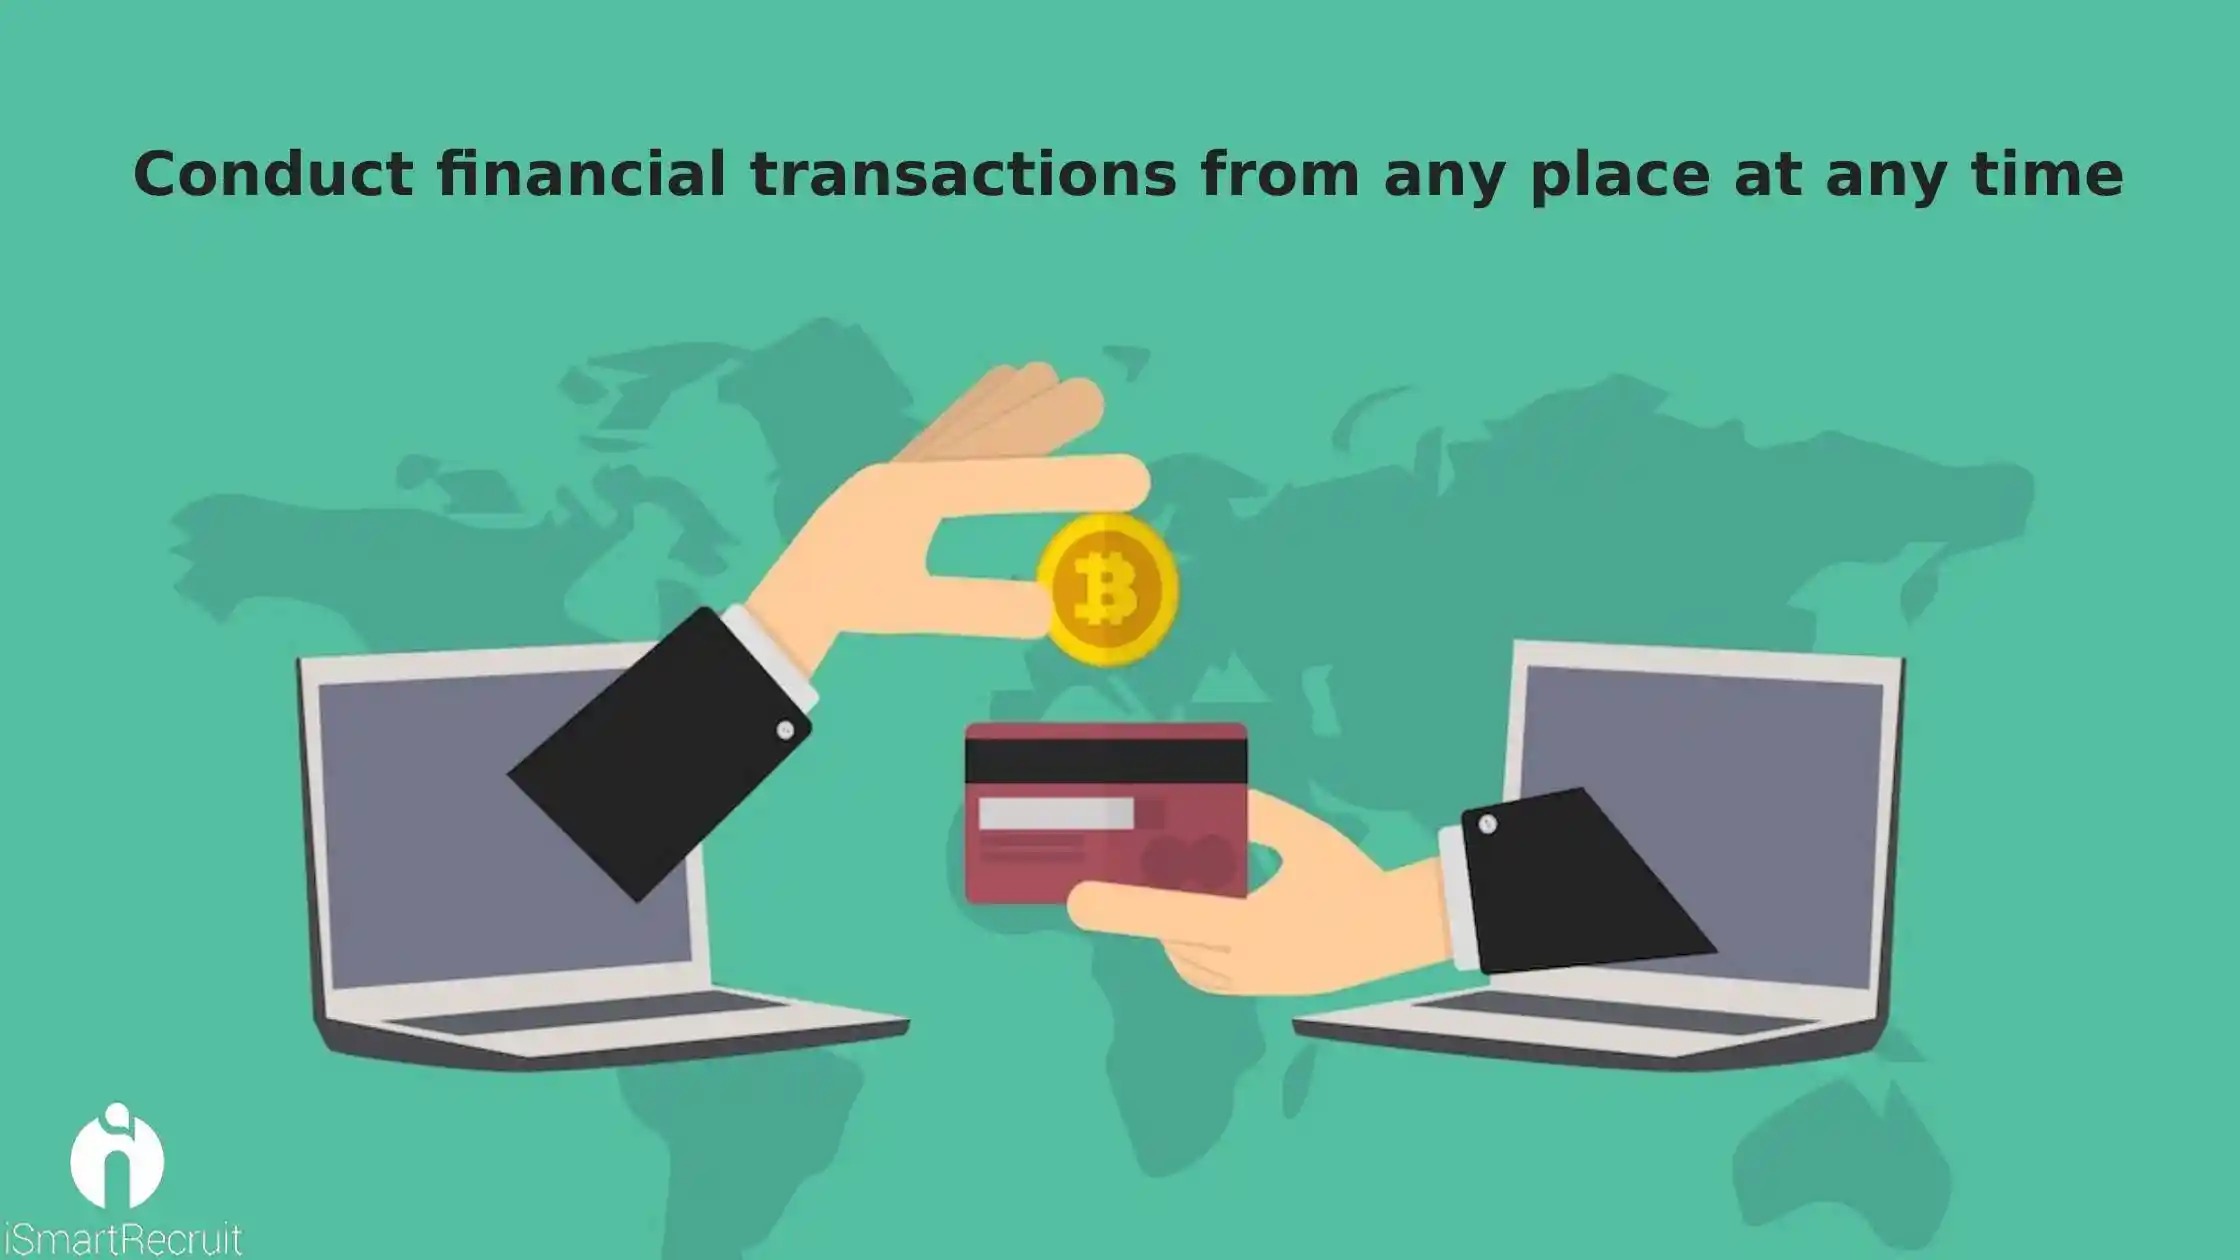 Conduct financial transactions from any place at any time